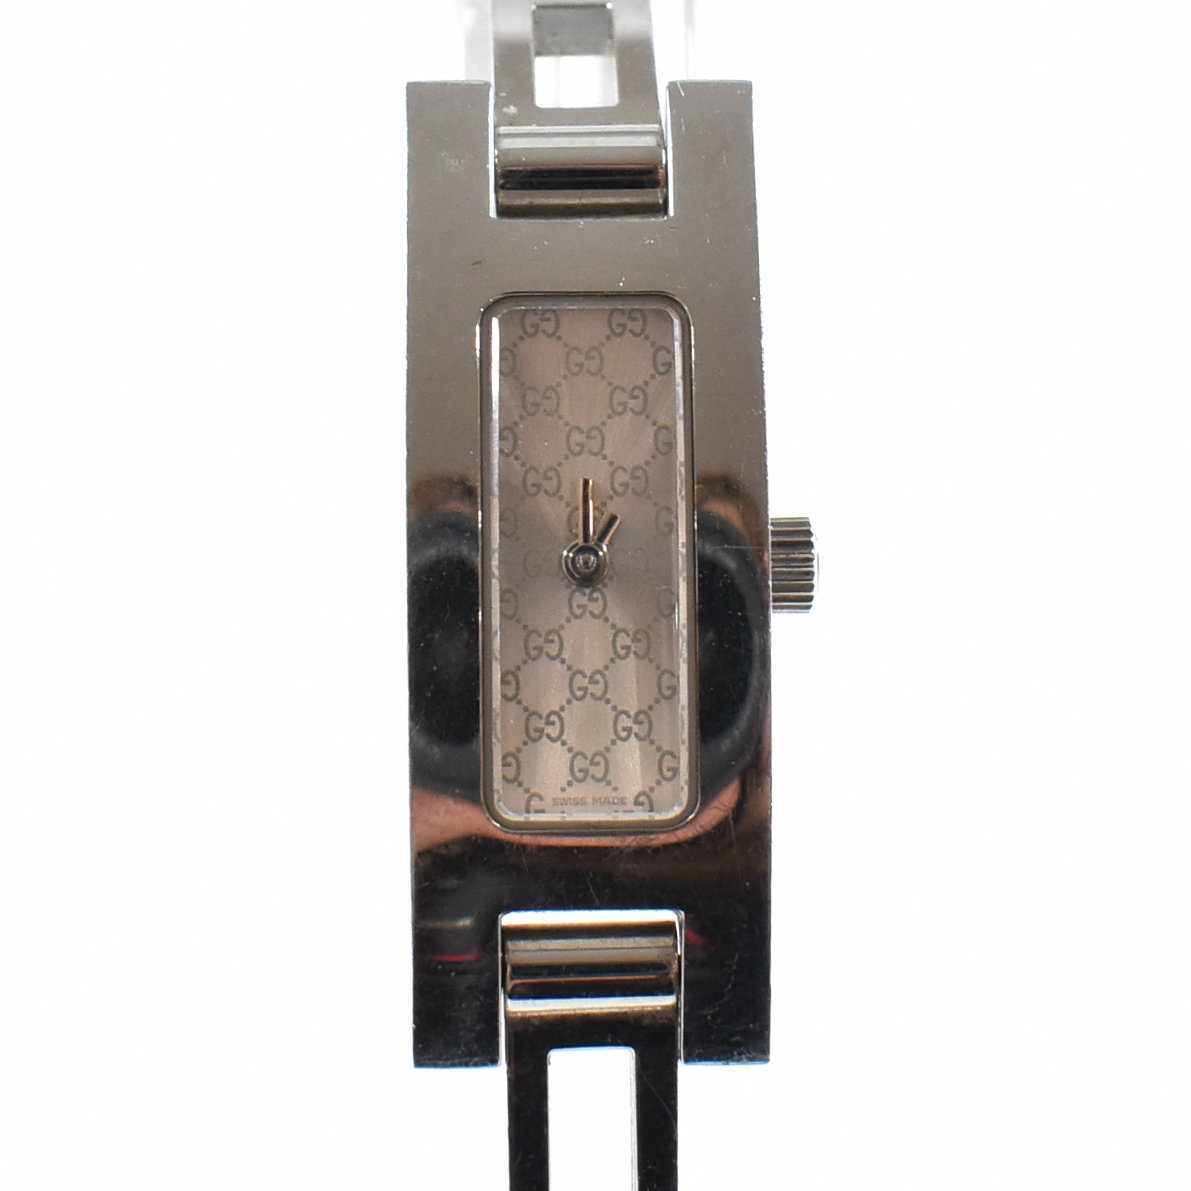 GUCCI 3900L STAINLESS STEEL WRIST WATCH - Image 10 of 10